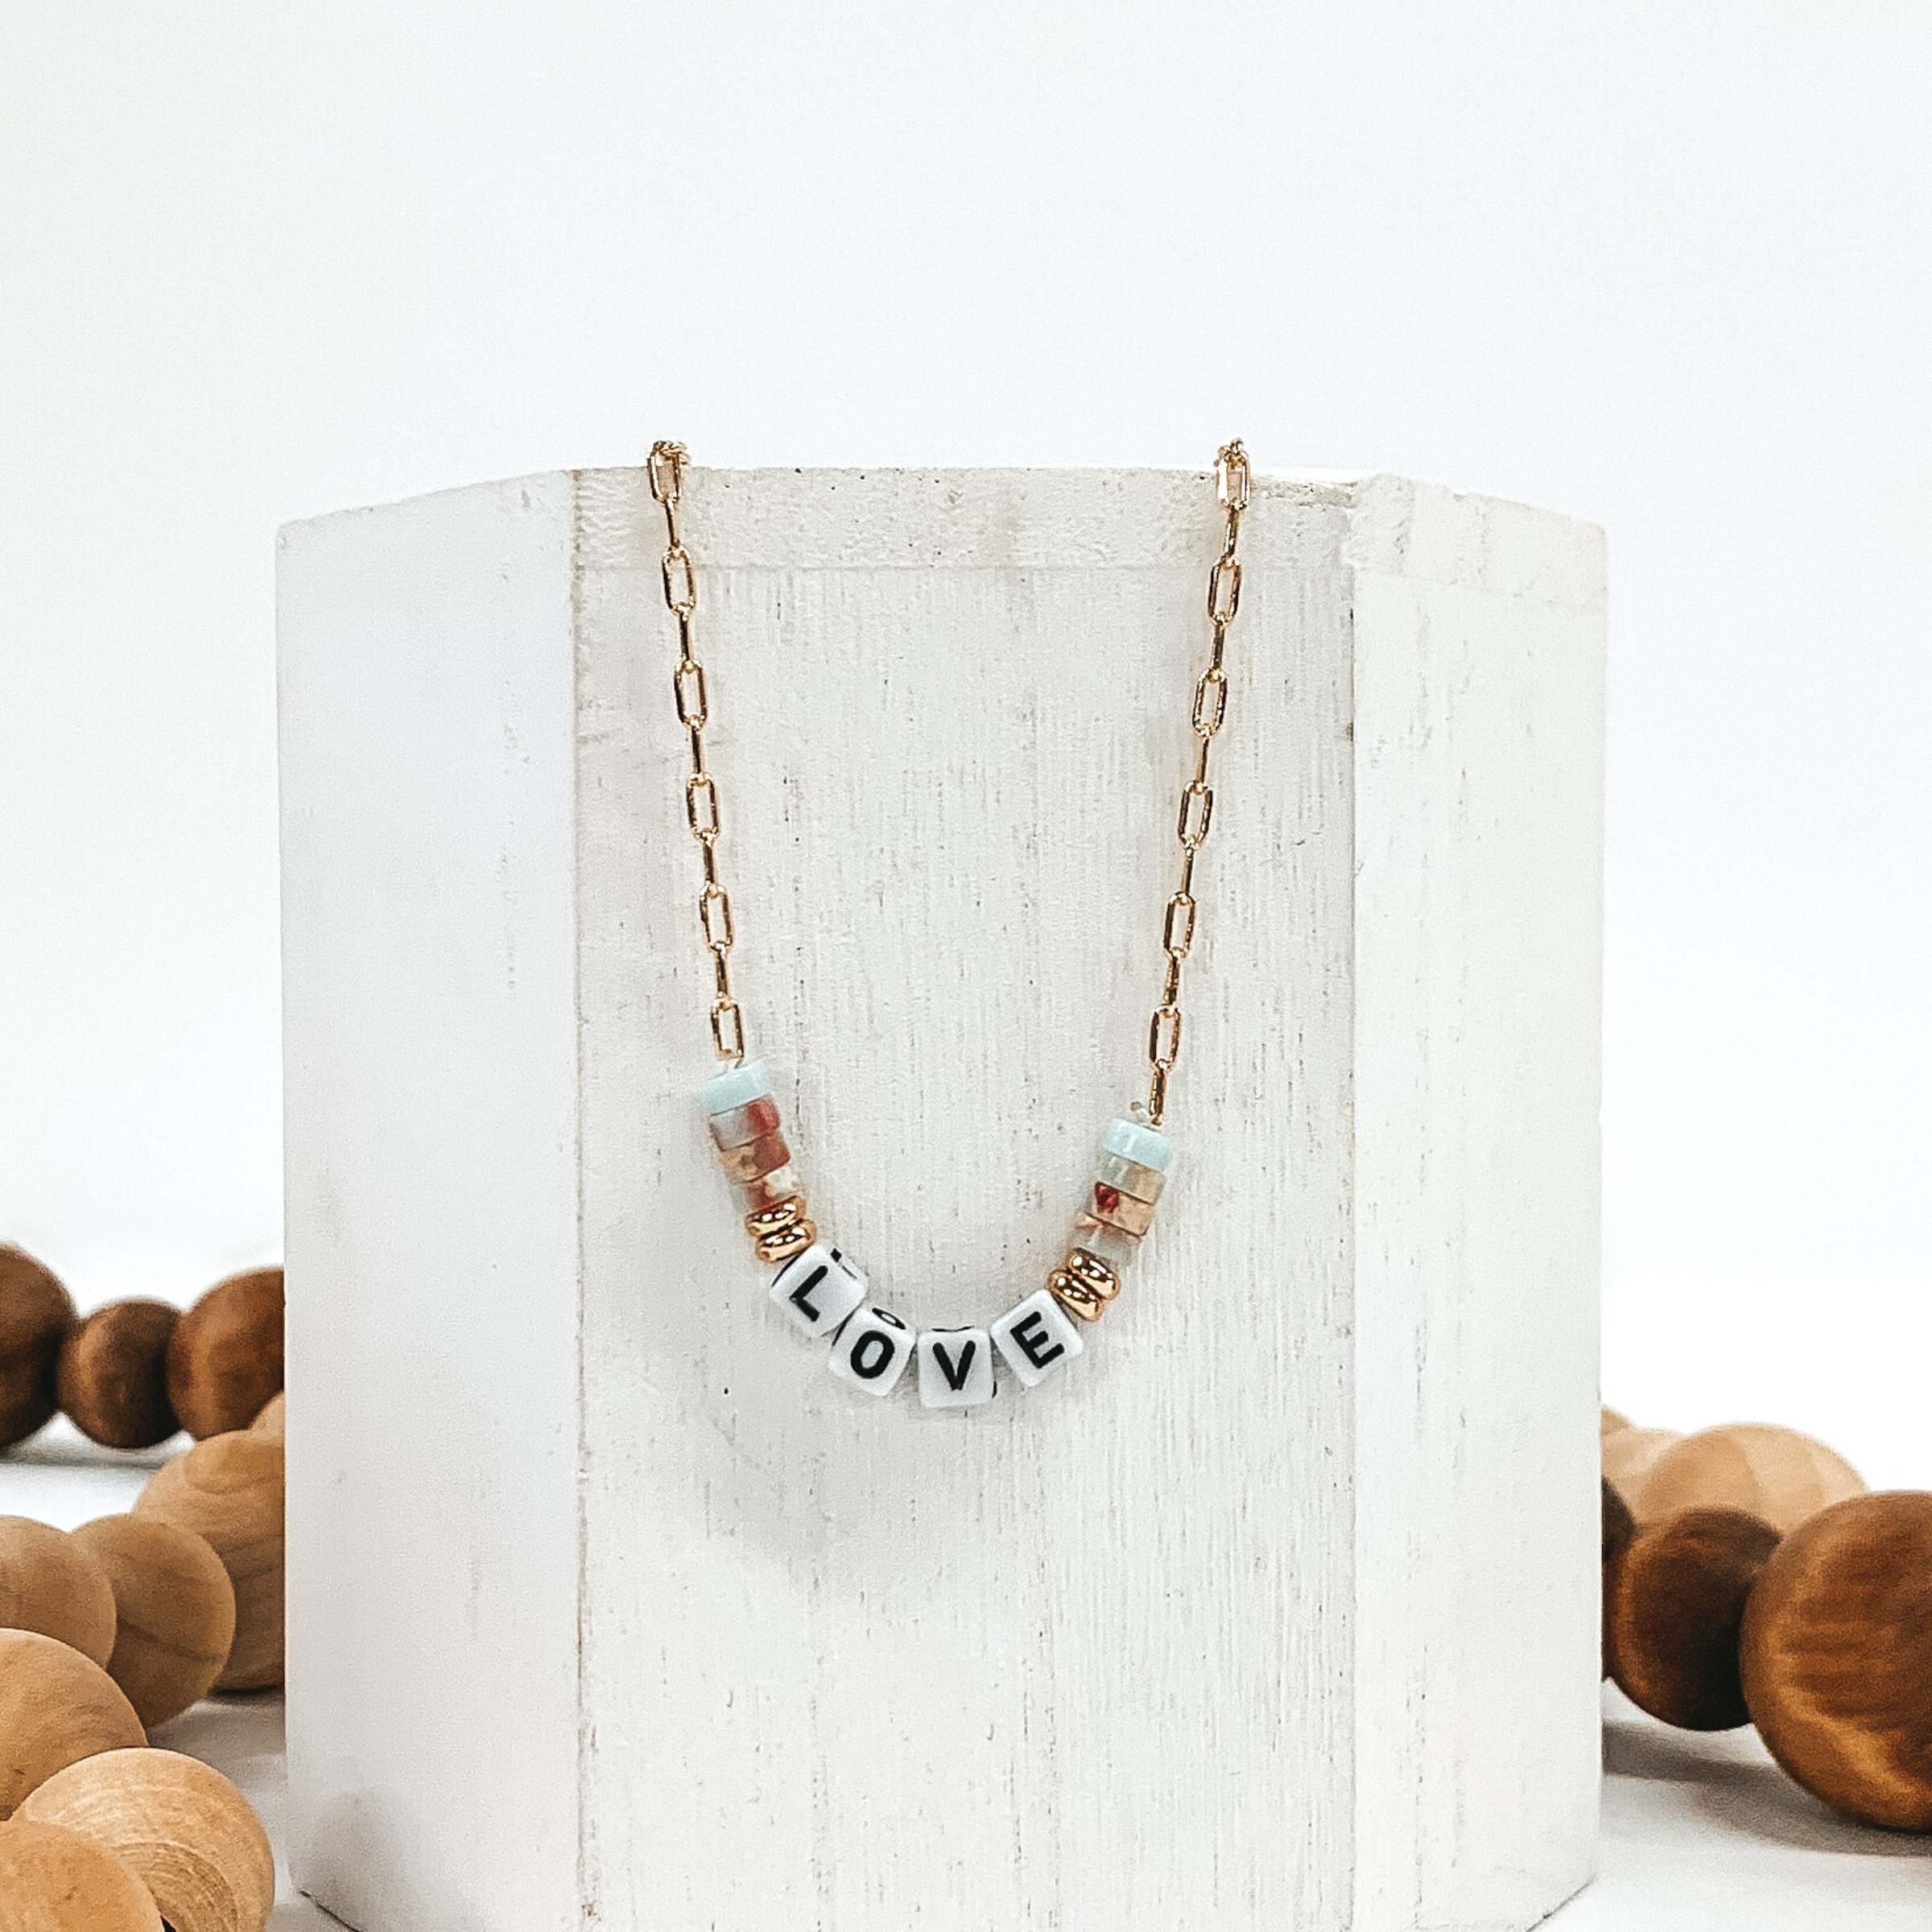 Small gold chain necklace with colorful marble beads, gold beads, and white letter beads that spell out "LOVE". Pictured of a white block that is on a white background with tan and brown beads.